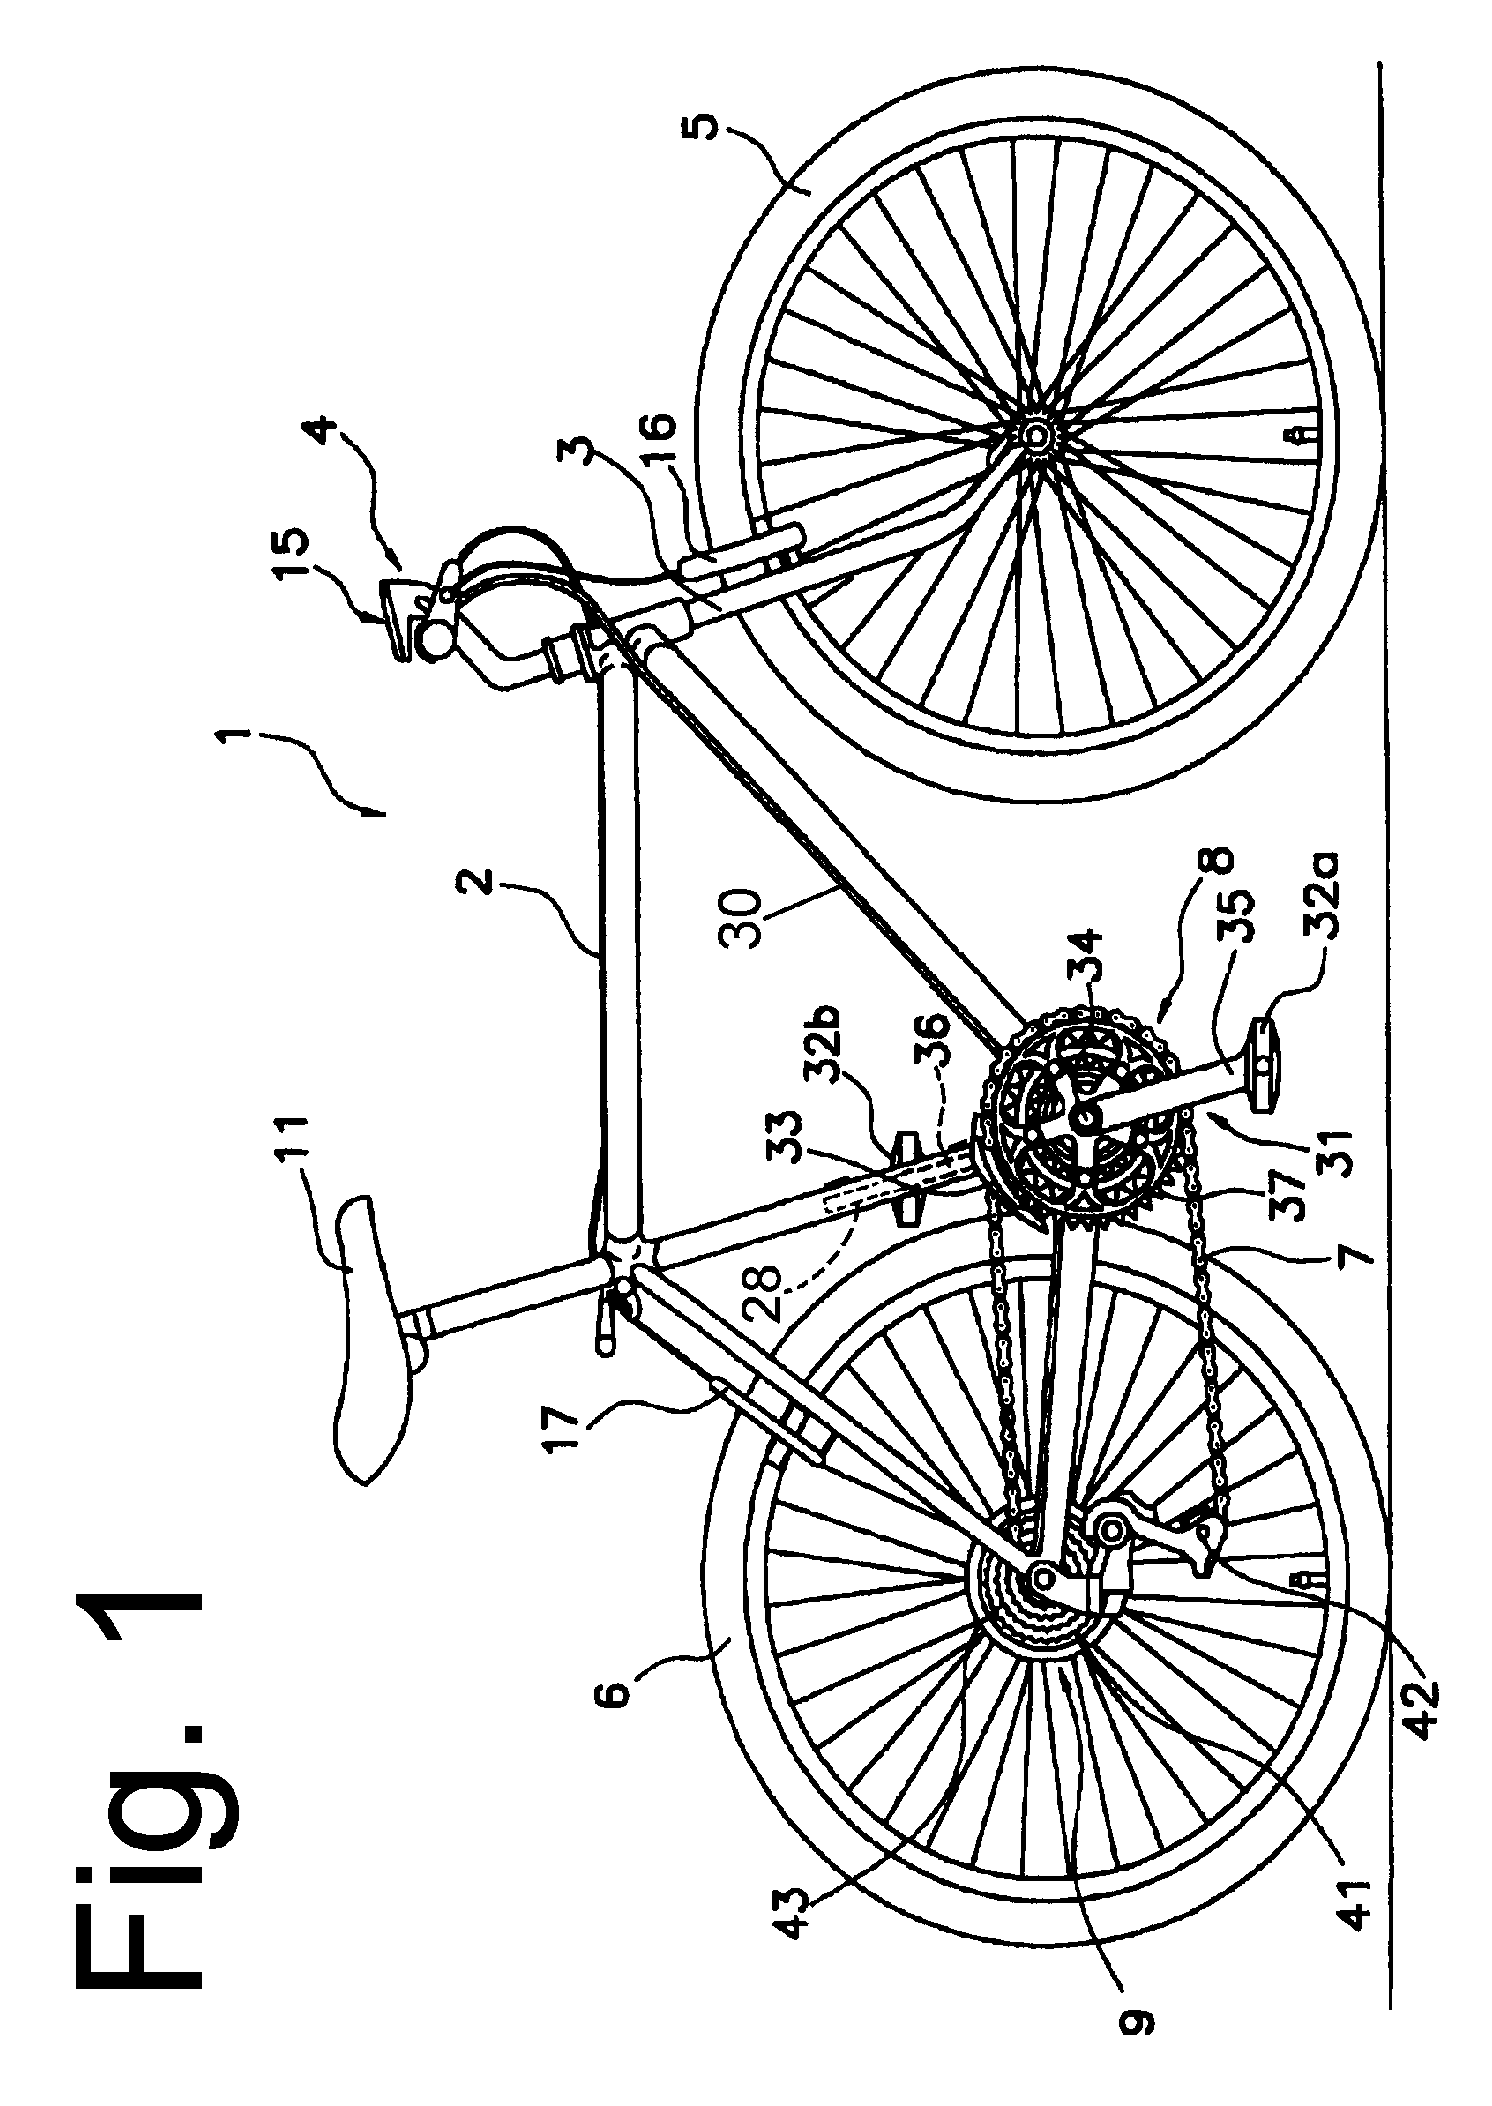 Apparatus for mounting an electrical component to a bicycle